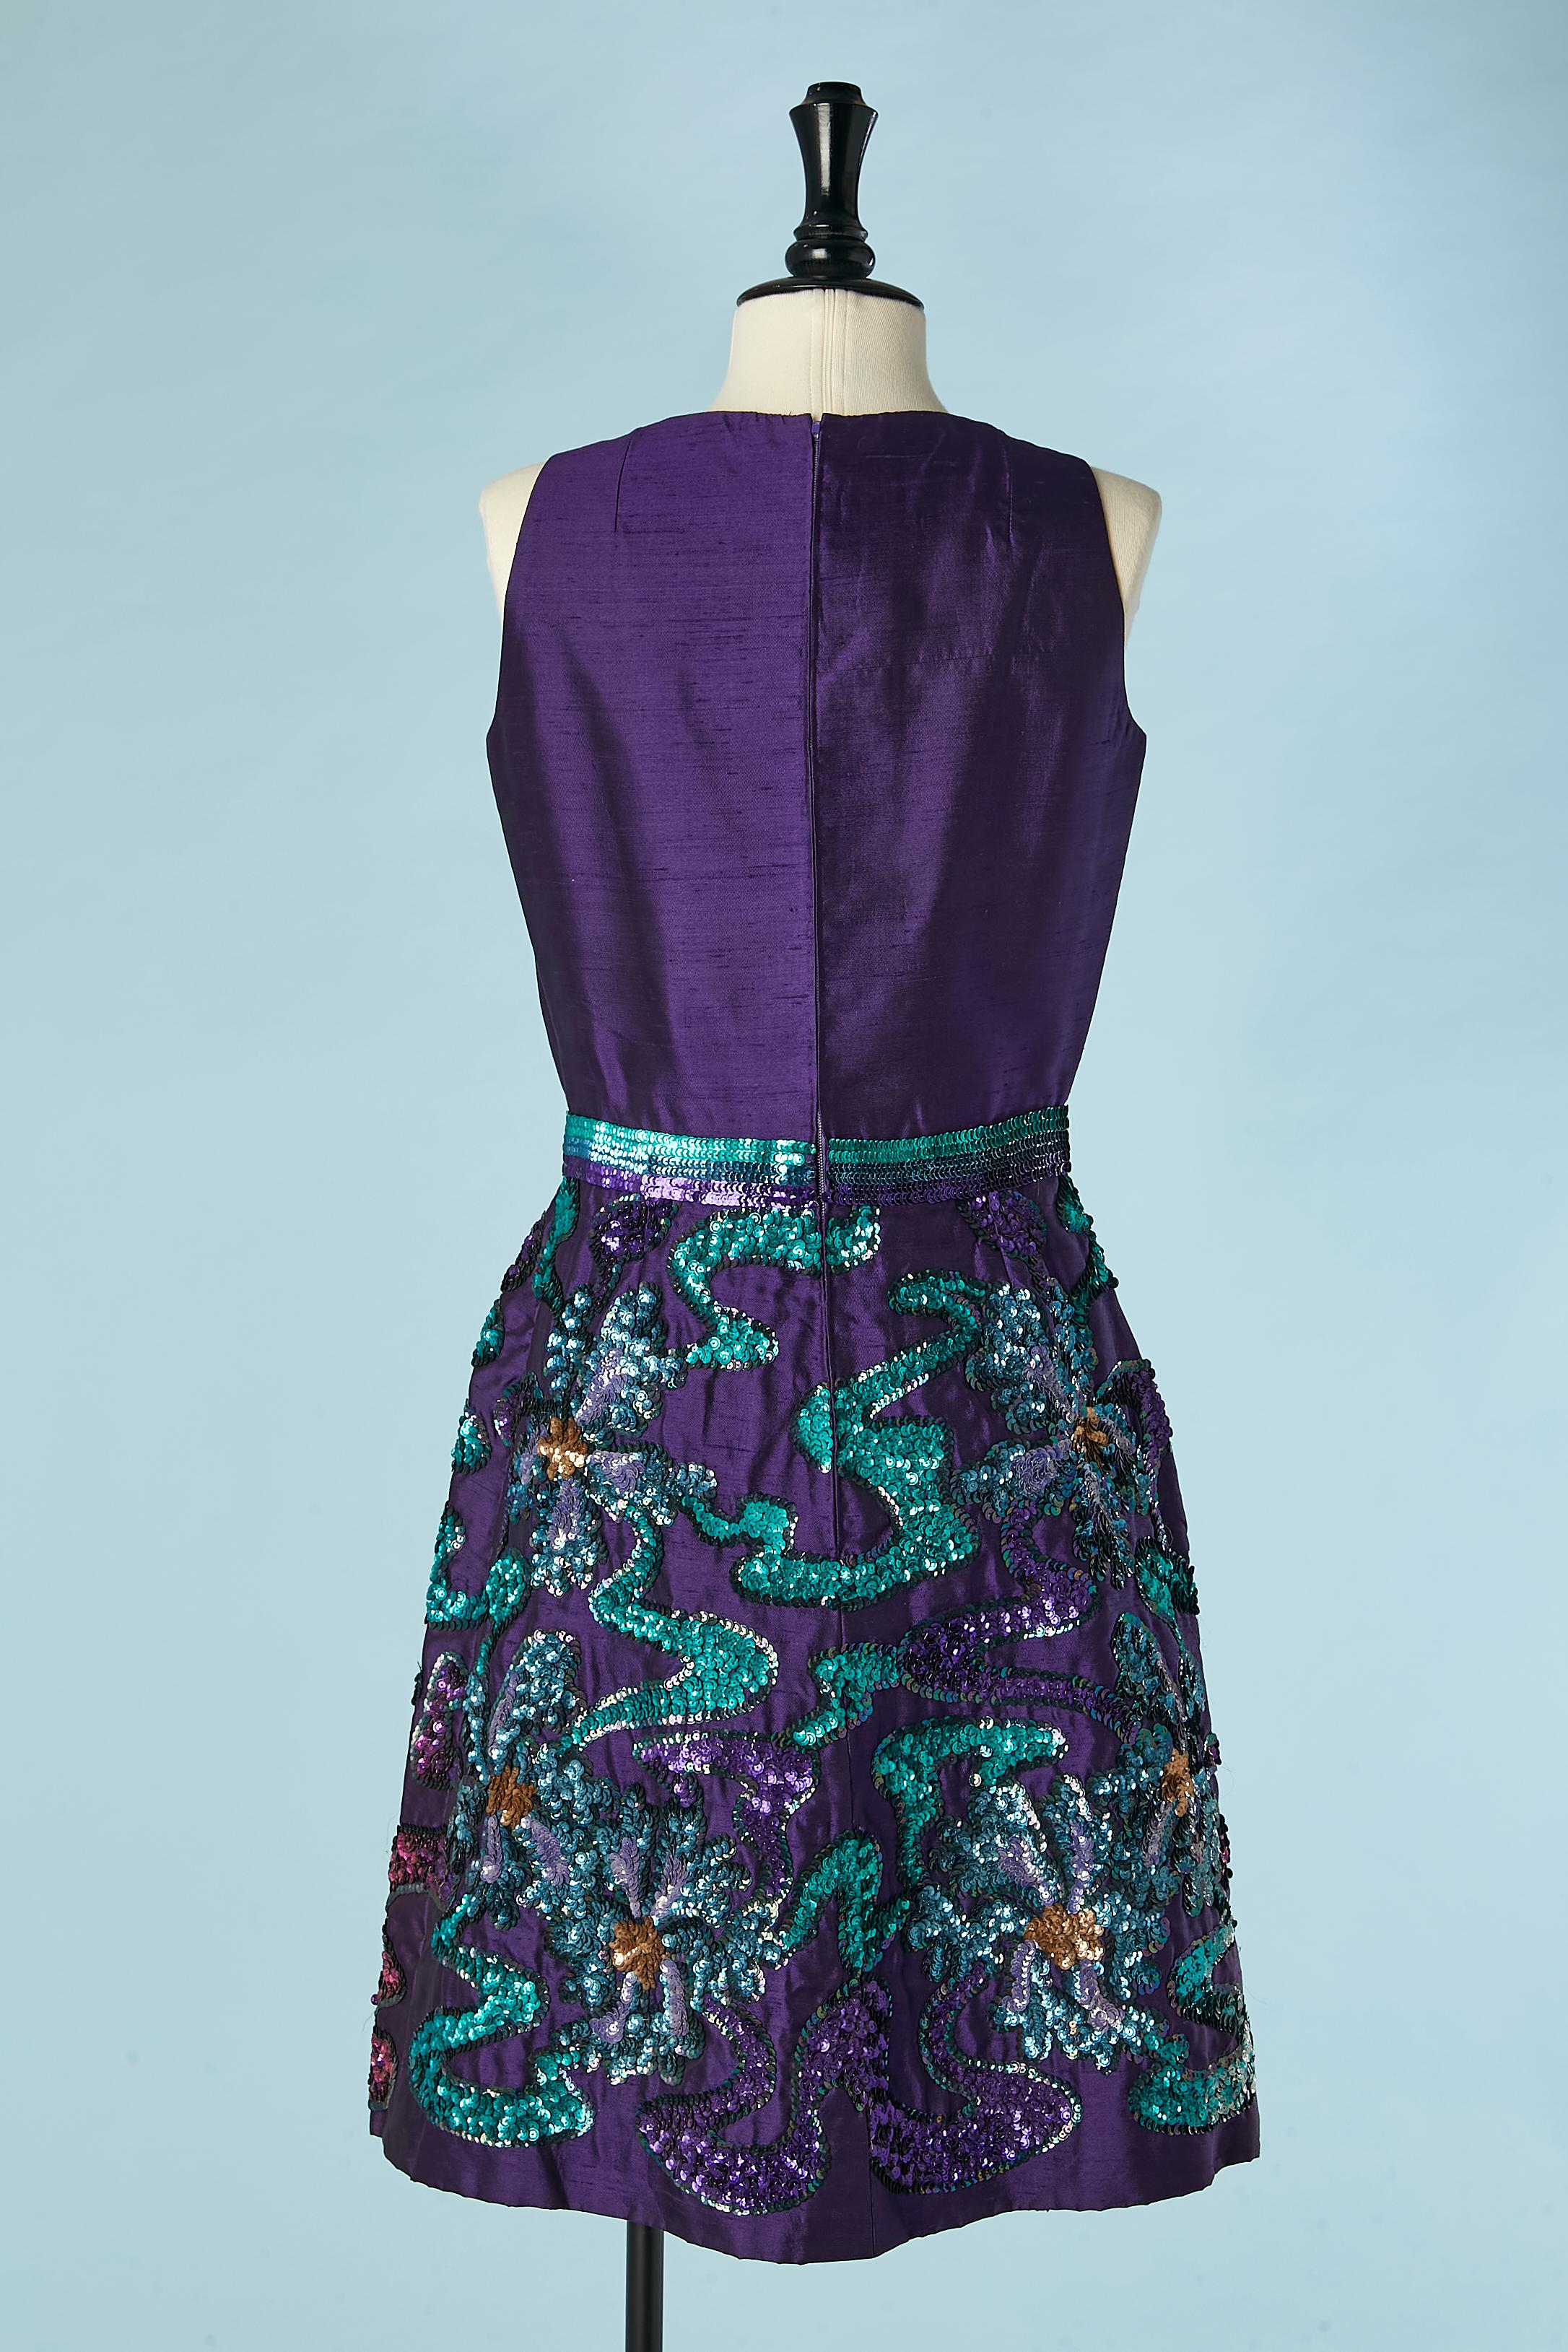 Purple shantung cocktail dress with sequins embroideries on the skirt Circa 1960 For Sale 2